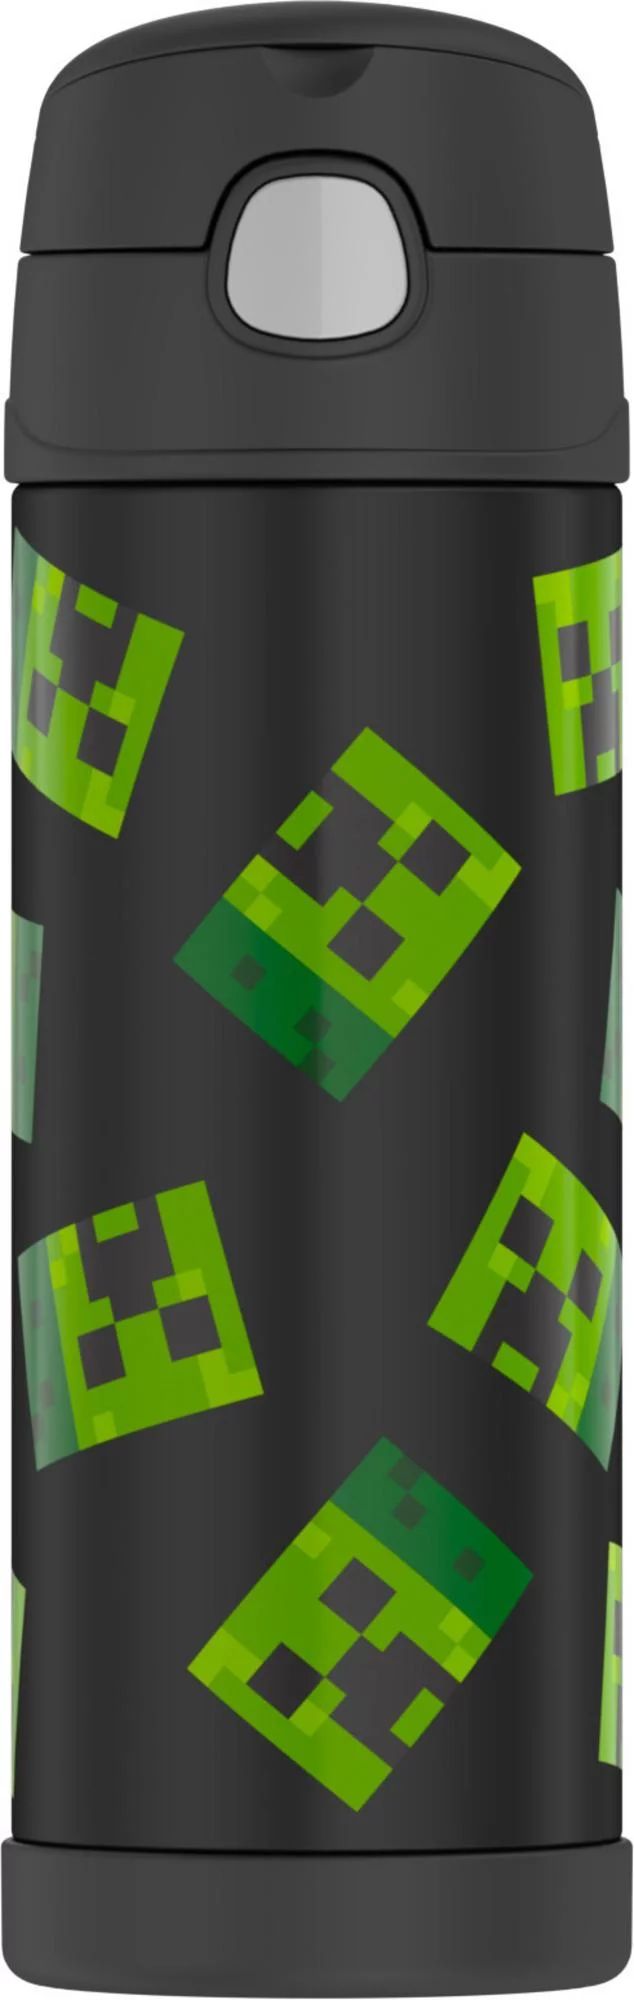 Thermos Funtainer Vacuum Insulated Stainless Steel Water Bottle, Minecraft, 16 fl oz | Walmart (US)